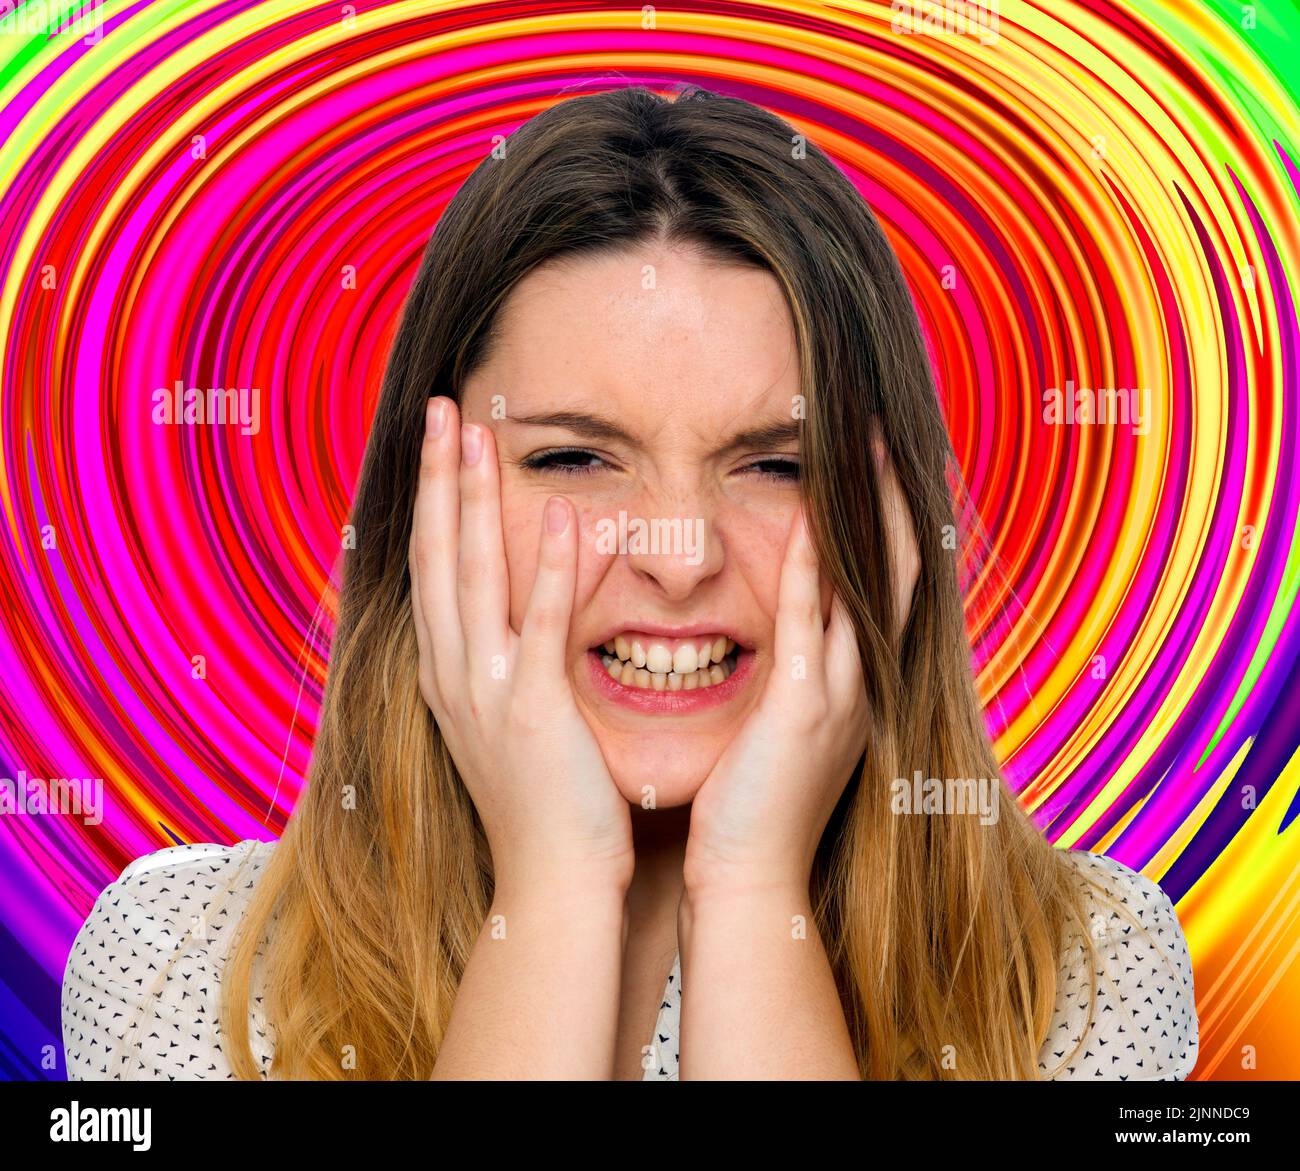 Stressed woman, composite image Stock Photo